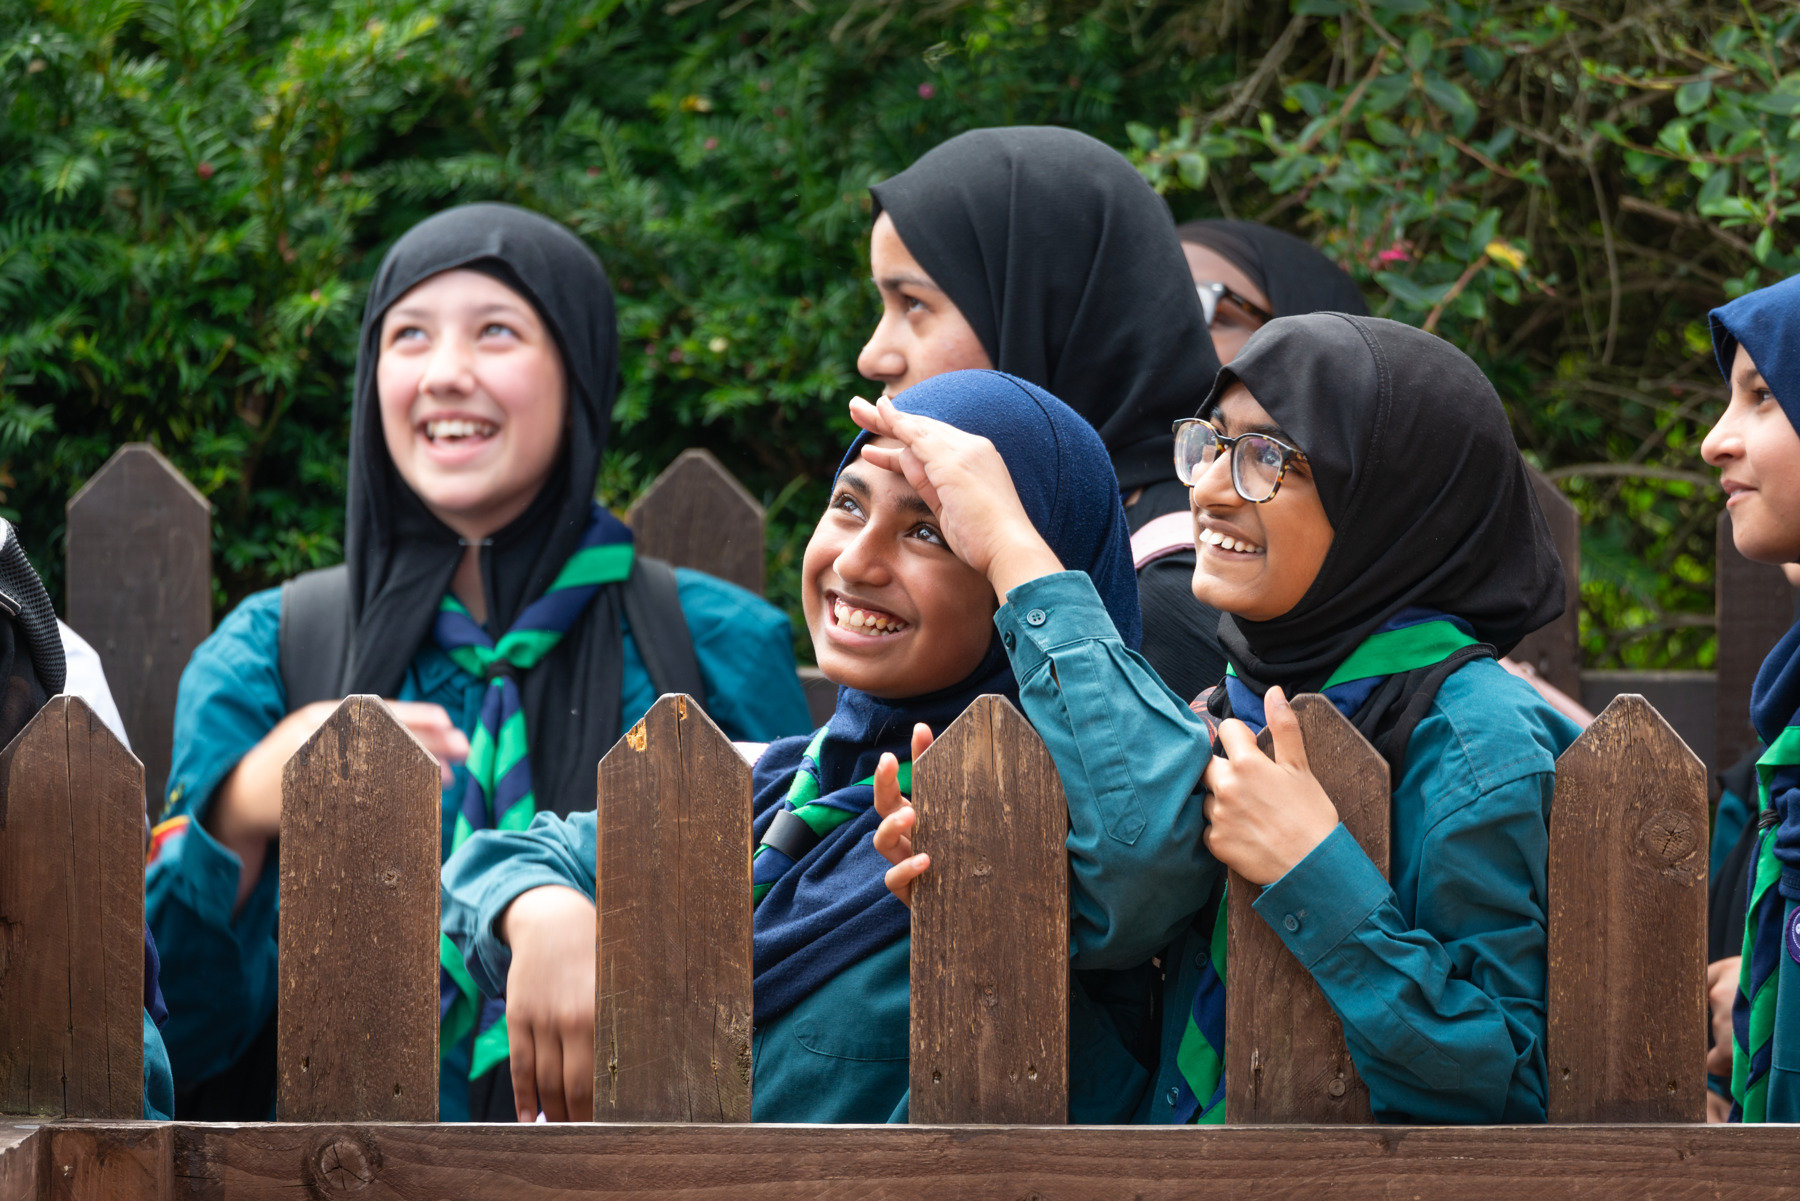 Scouts in uniform (blue shirts and green and navy neckers) are stood behind a brown fence. There are 6 Scouts in the image, and they're all looking up at the sky and smiling. 